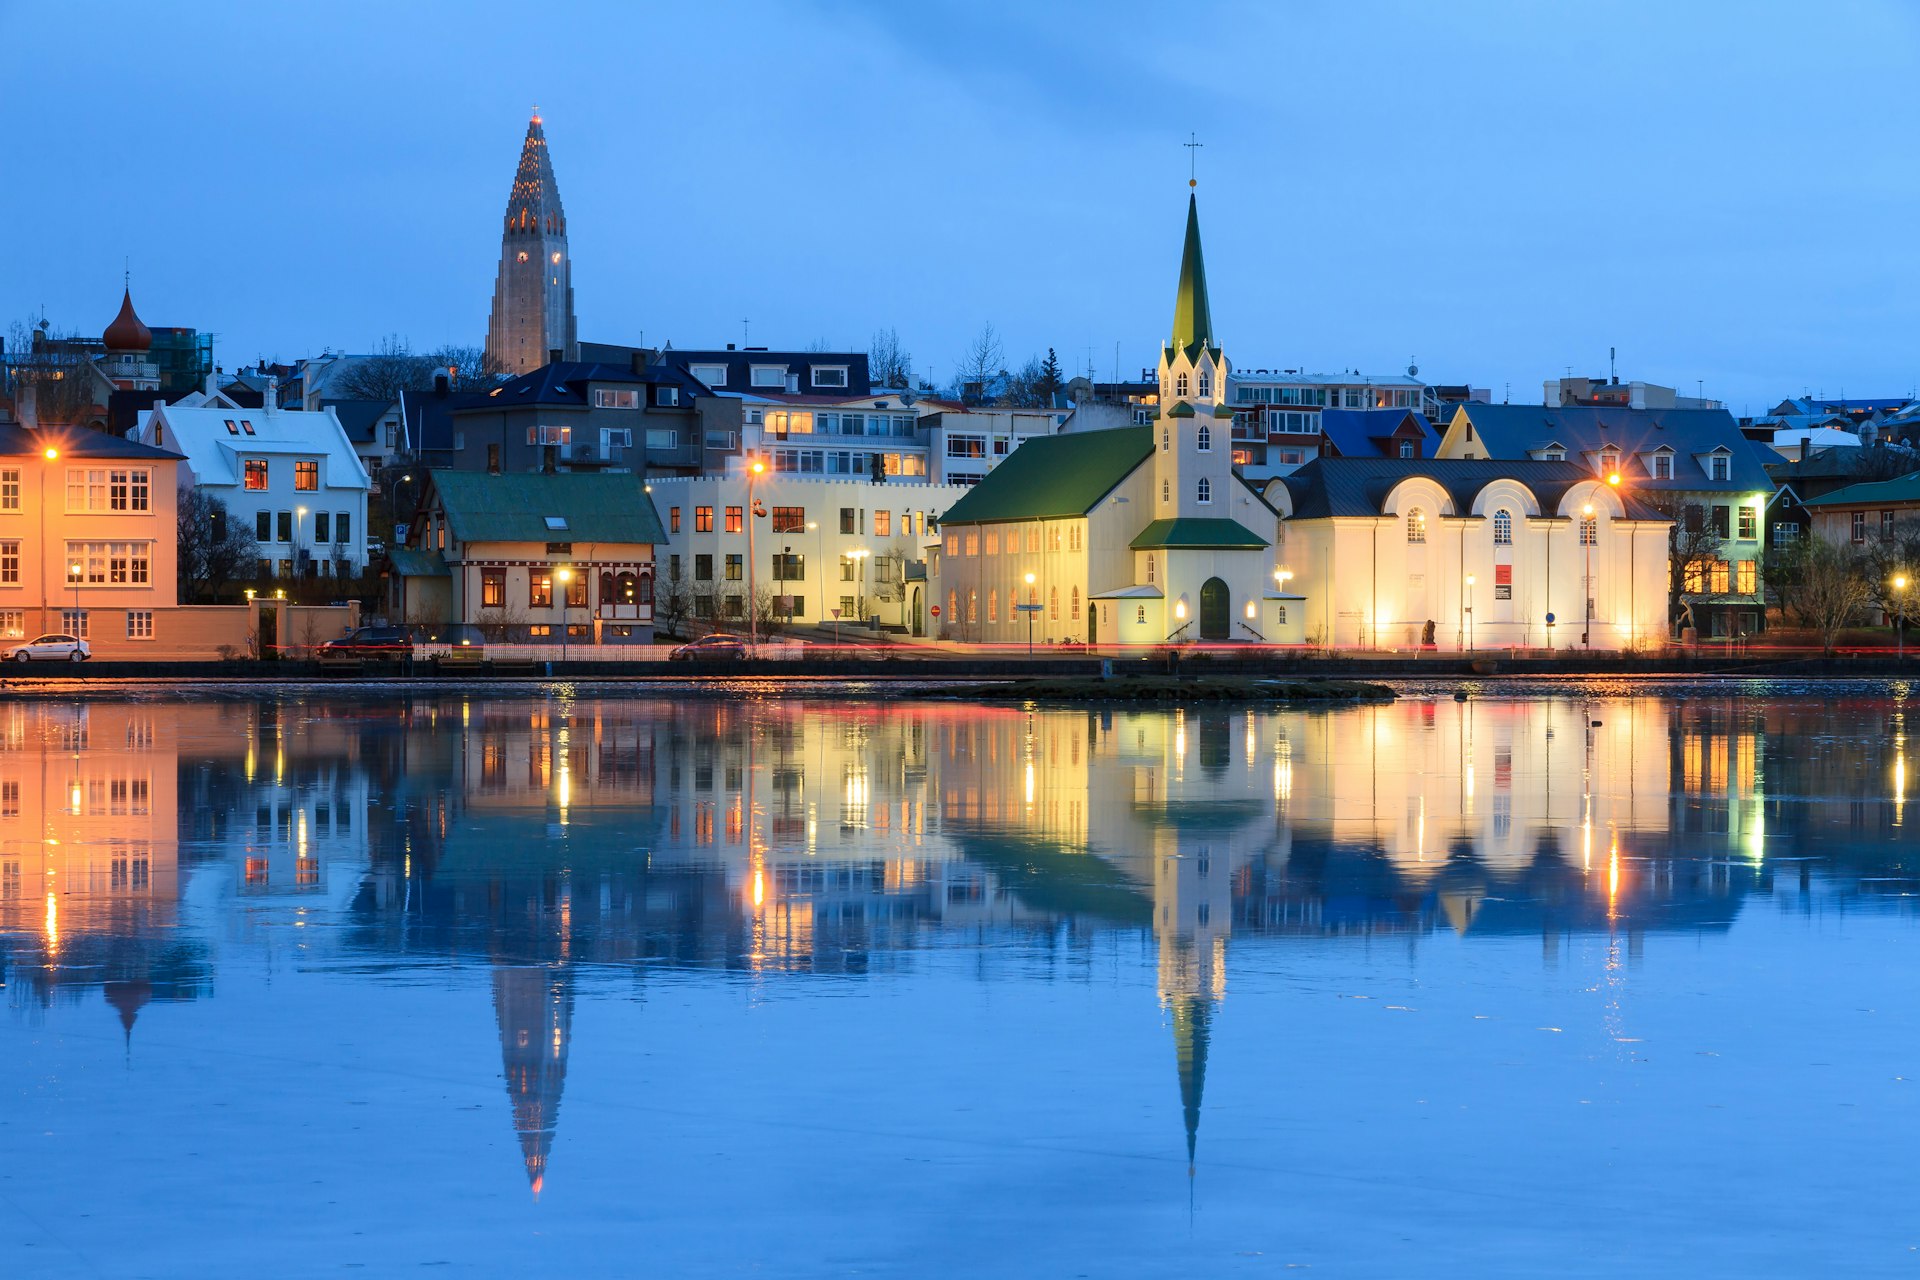 Reflection of the cityscape in Lake Tjornin during a winter twilight, Reykjavík, Iceland